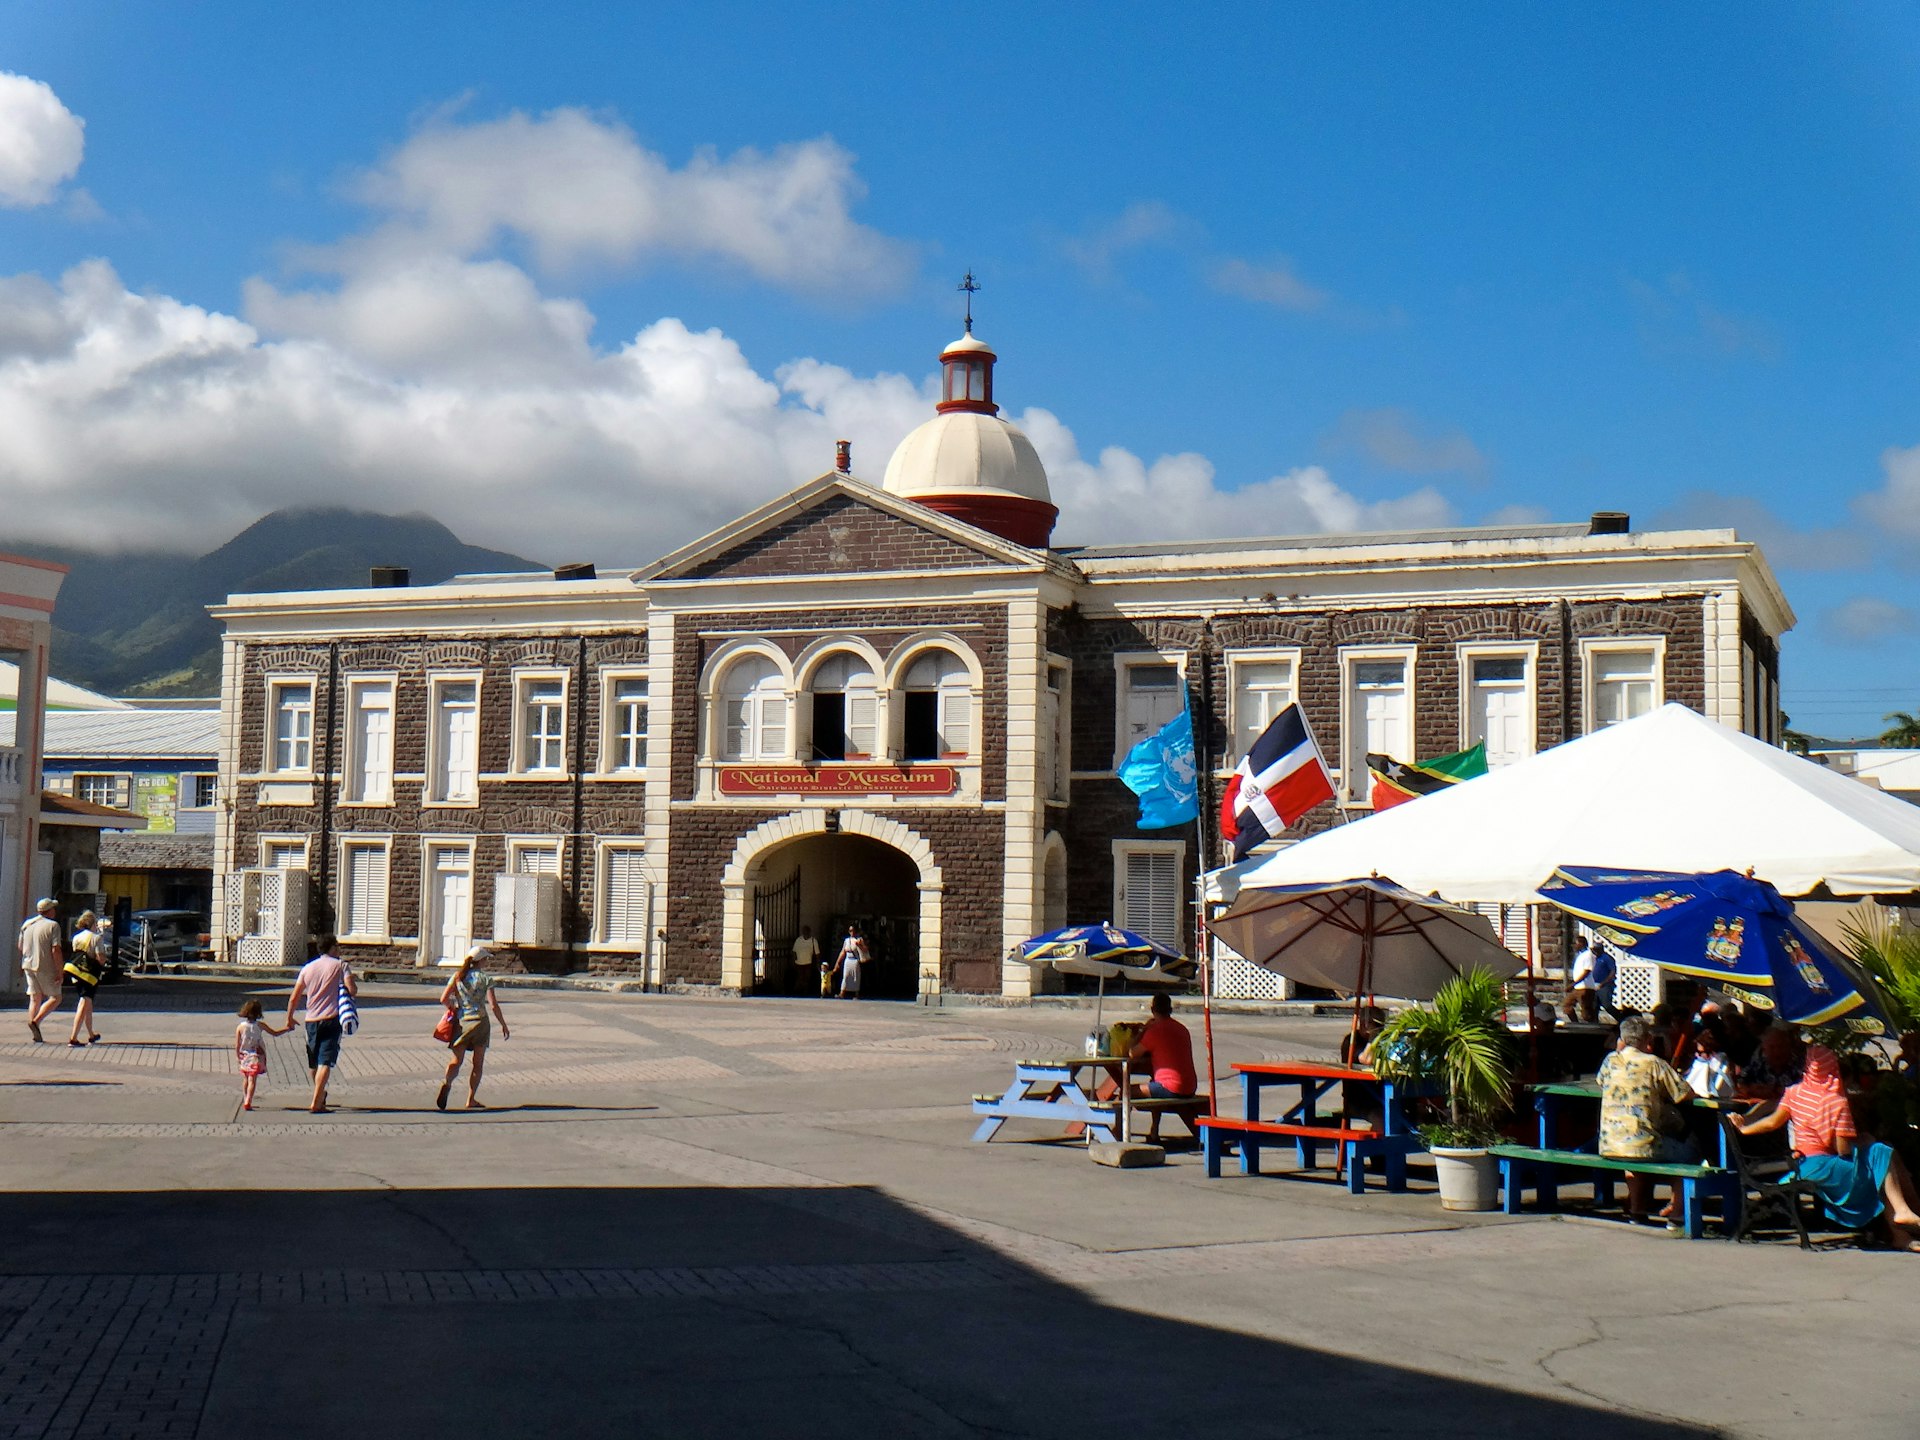 People outside of the National Museum of St. Kitts and Nevis in the city center of Basseterre